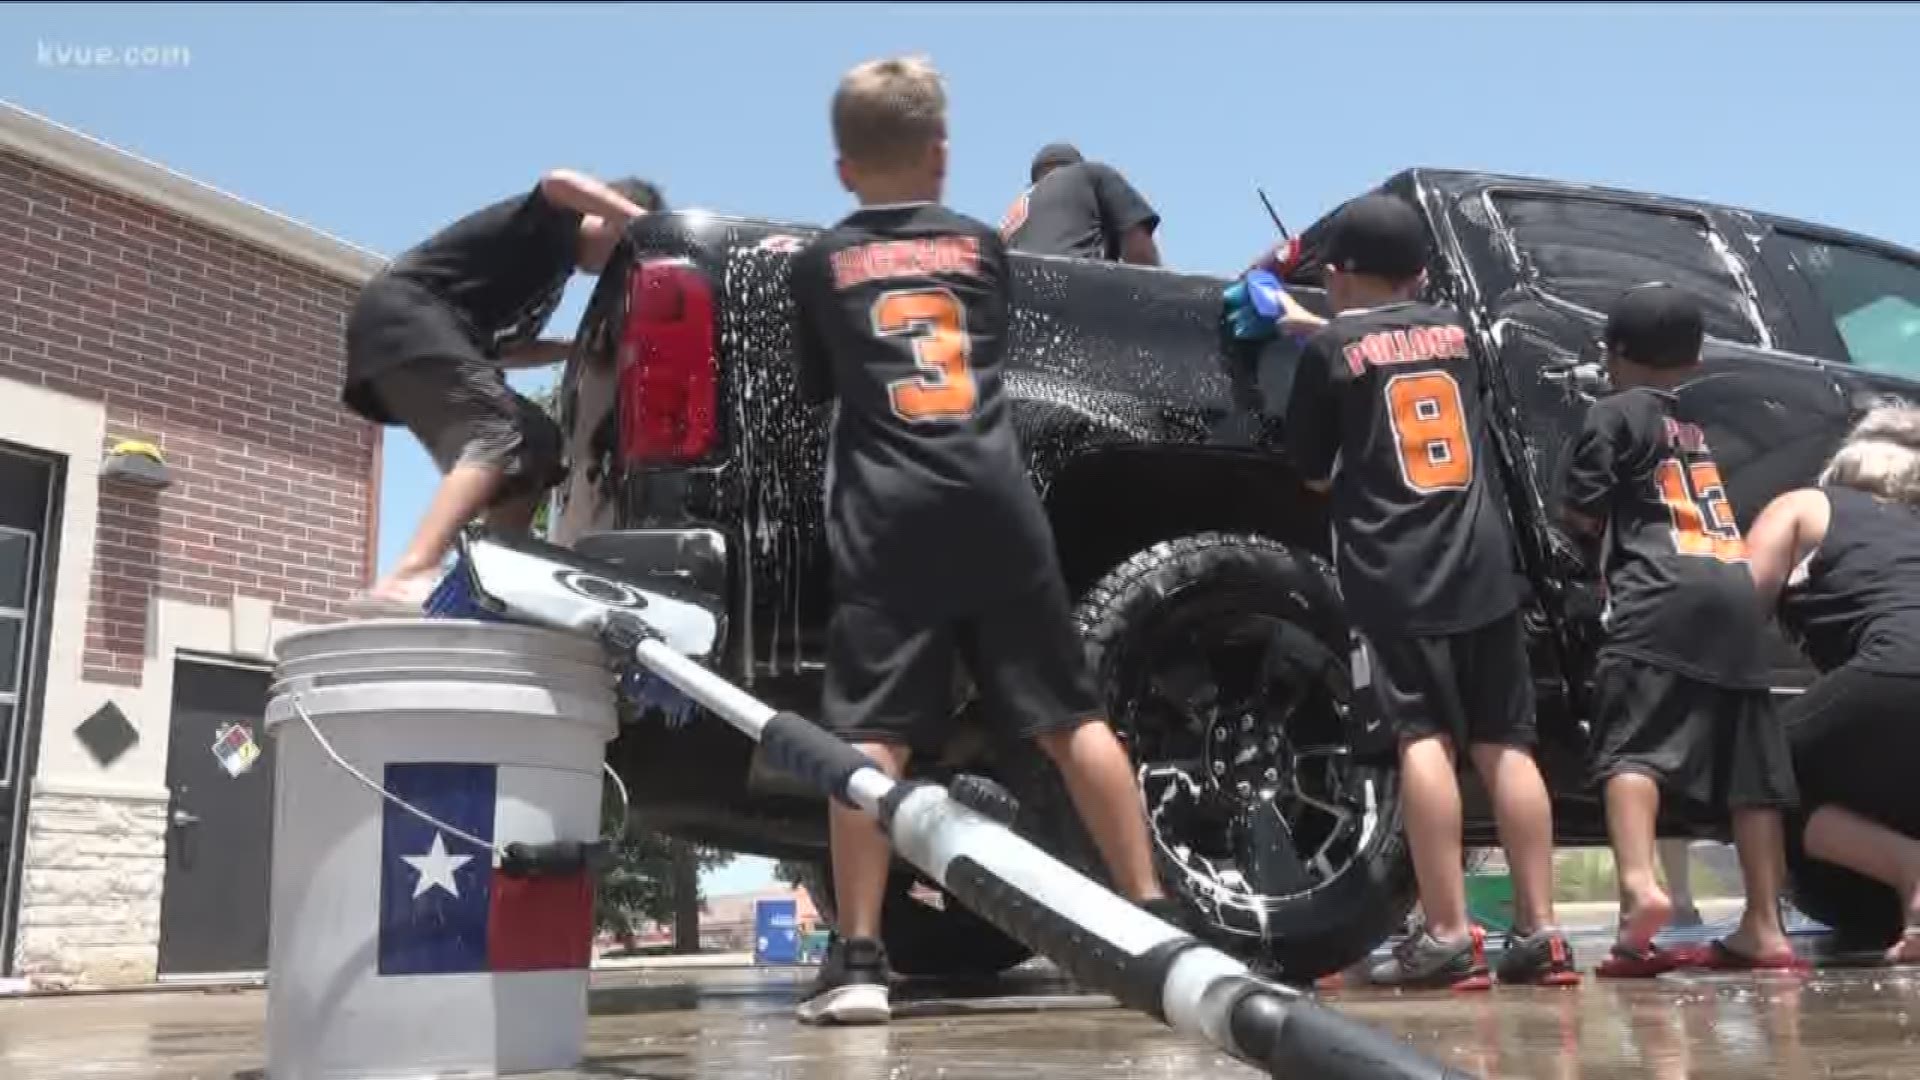 Hutto 8U All-Star Baseball team is heading to Youngsville, LA for the World Series.